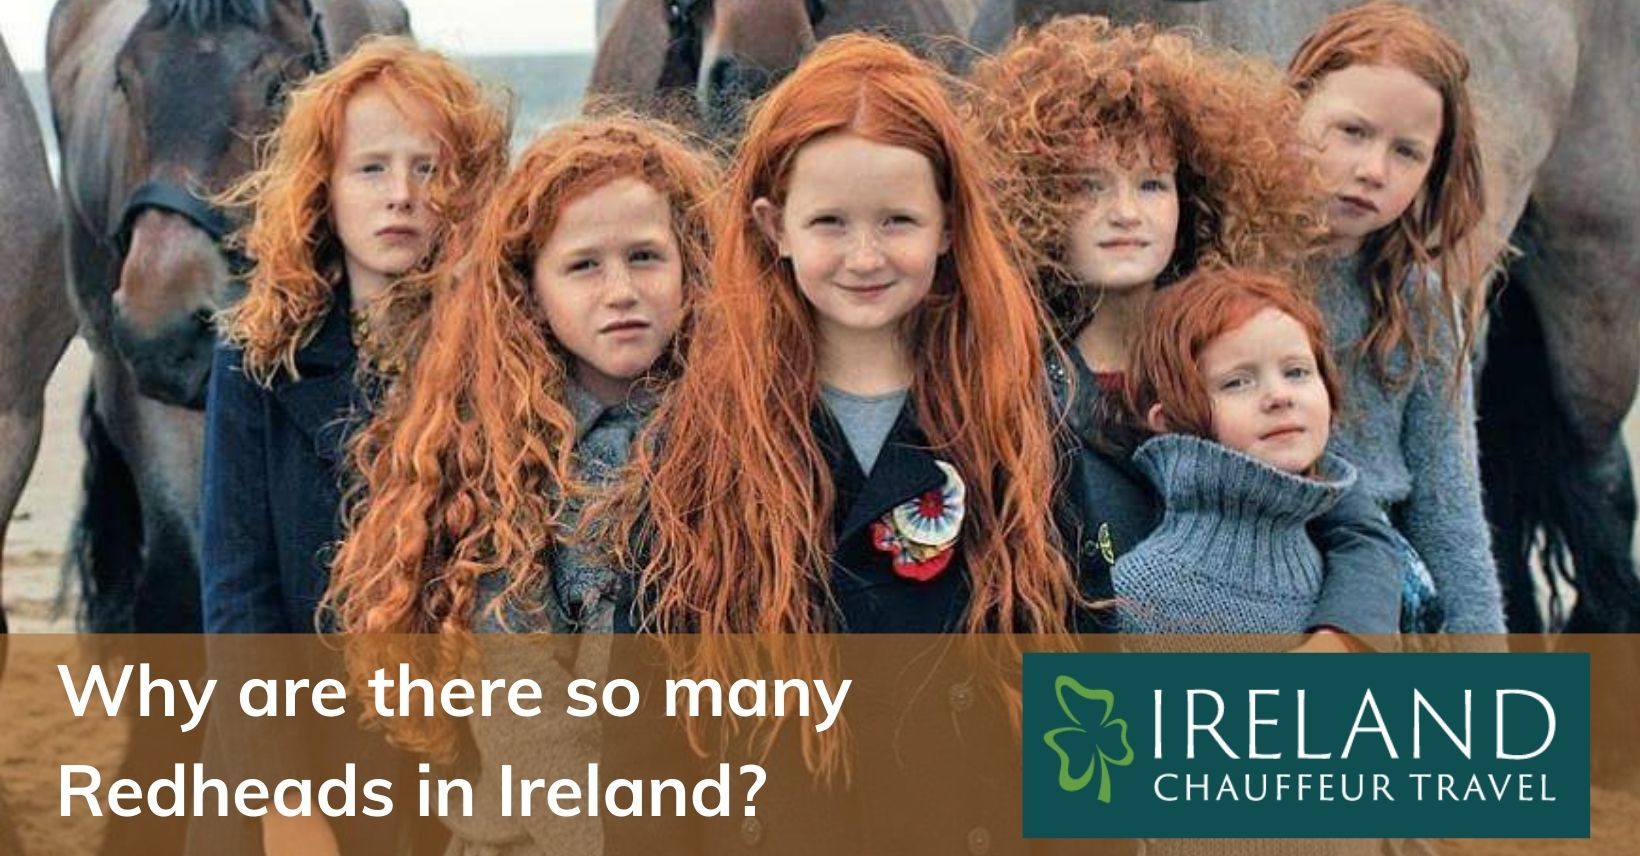 Why are there so many redheads in Ireland? | Ireland Chauffeur Travel